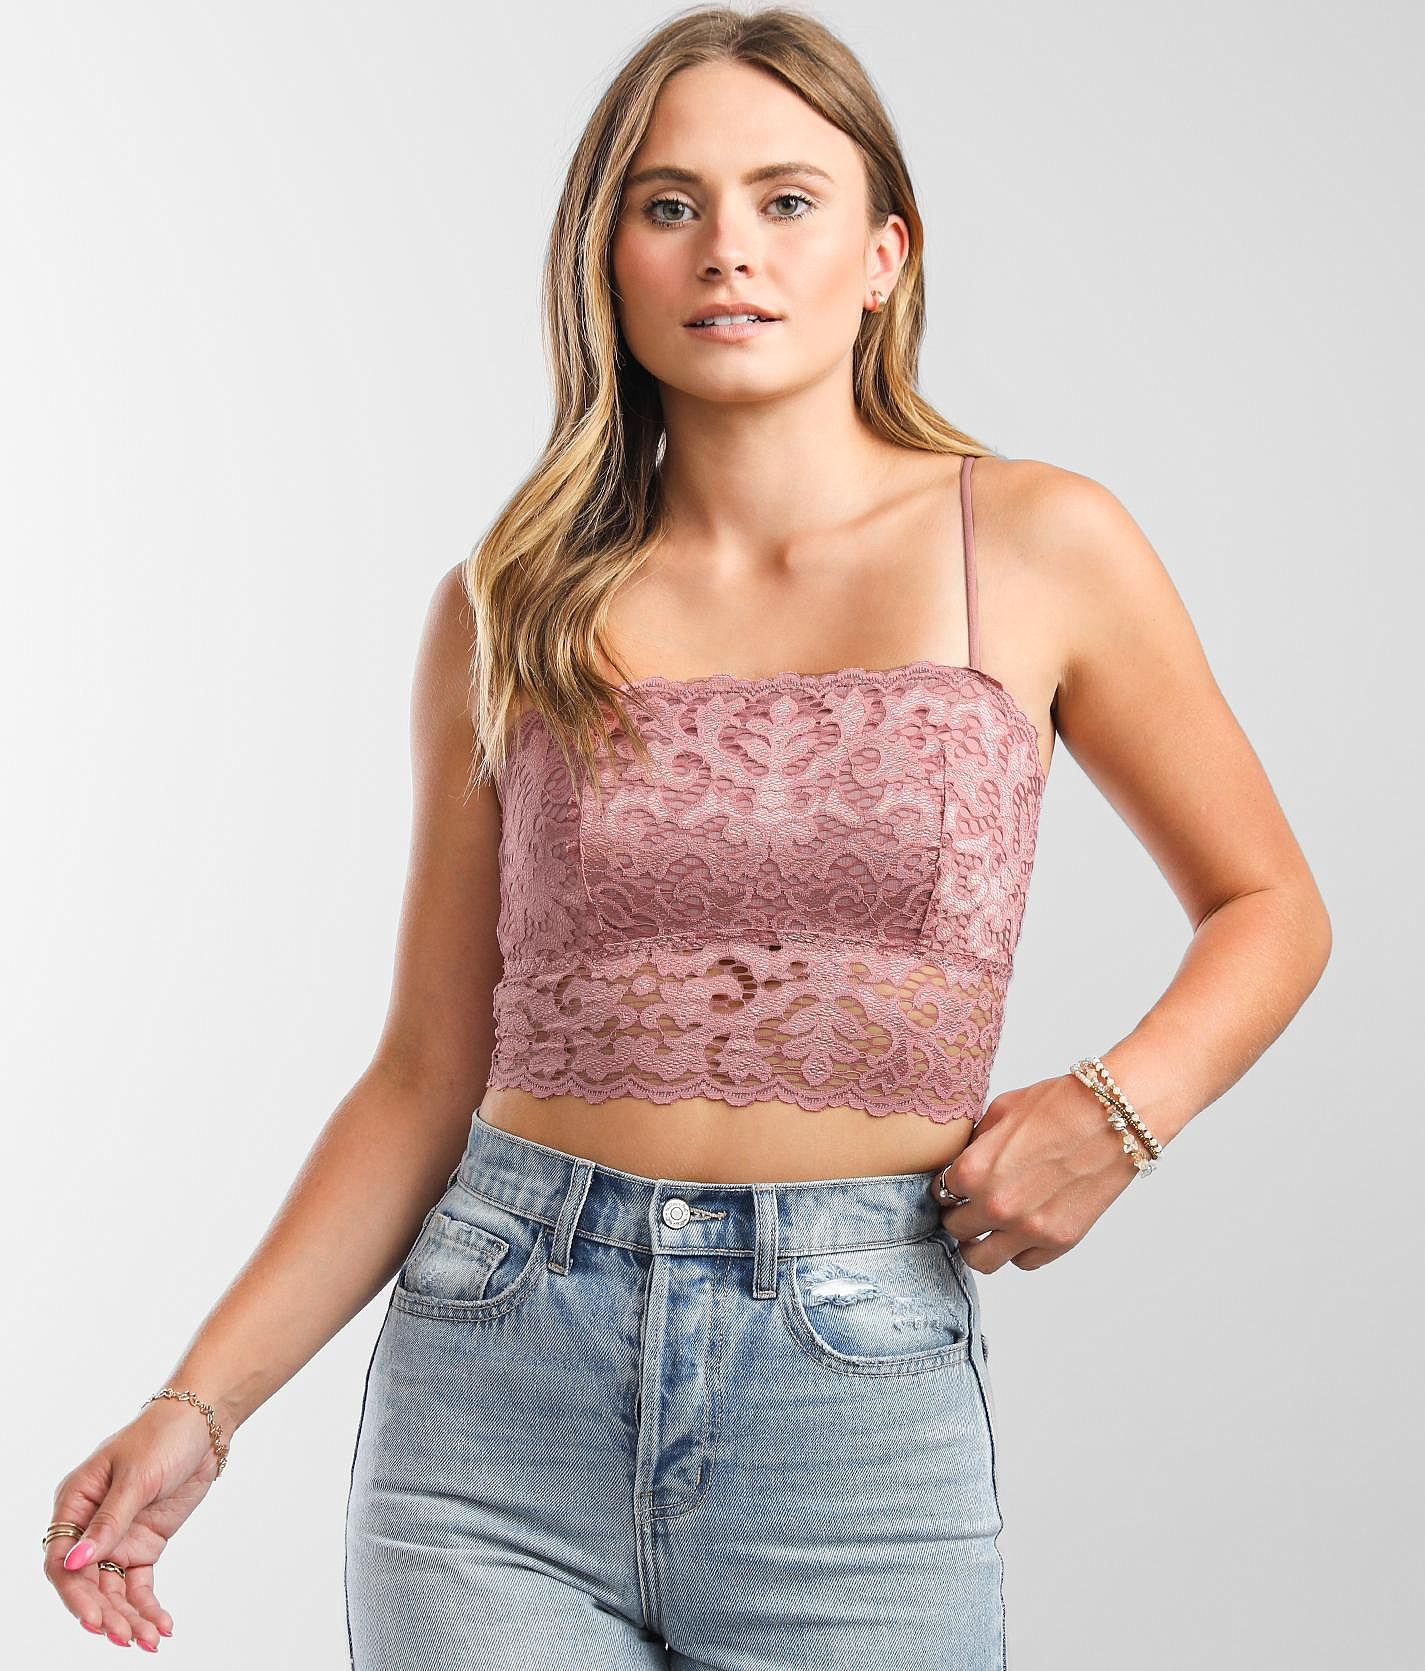 BKEssentials Lace Full Coverage Bralette - Women's Bandeaus